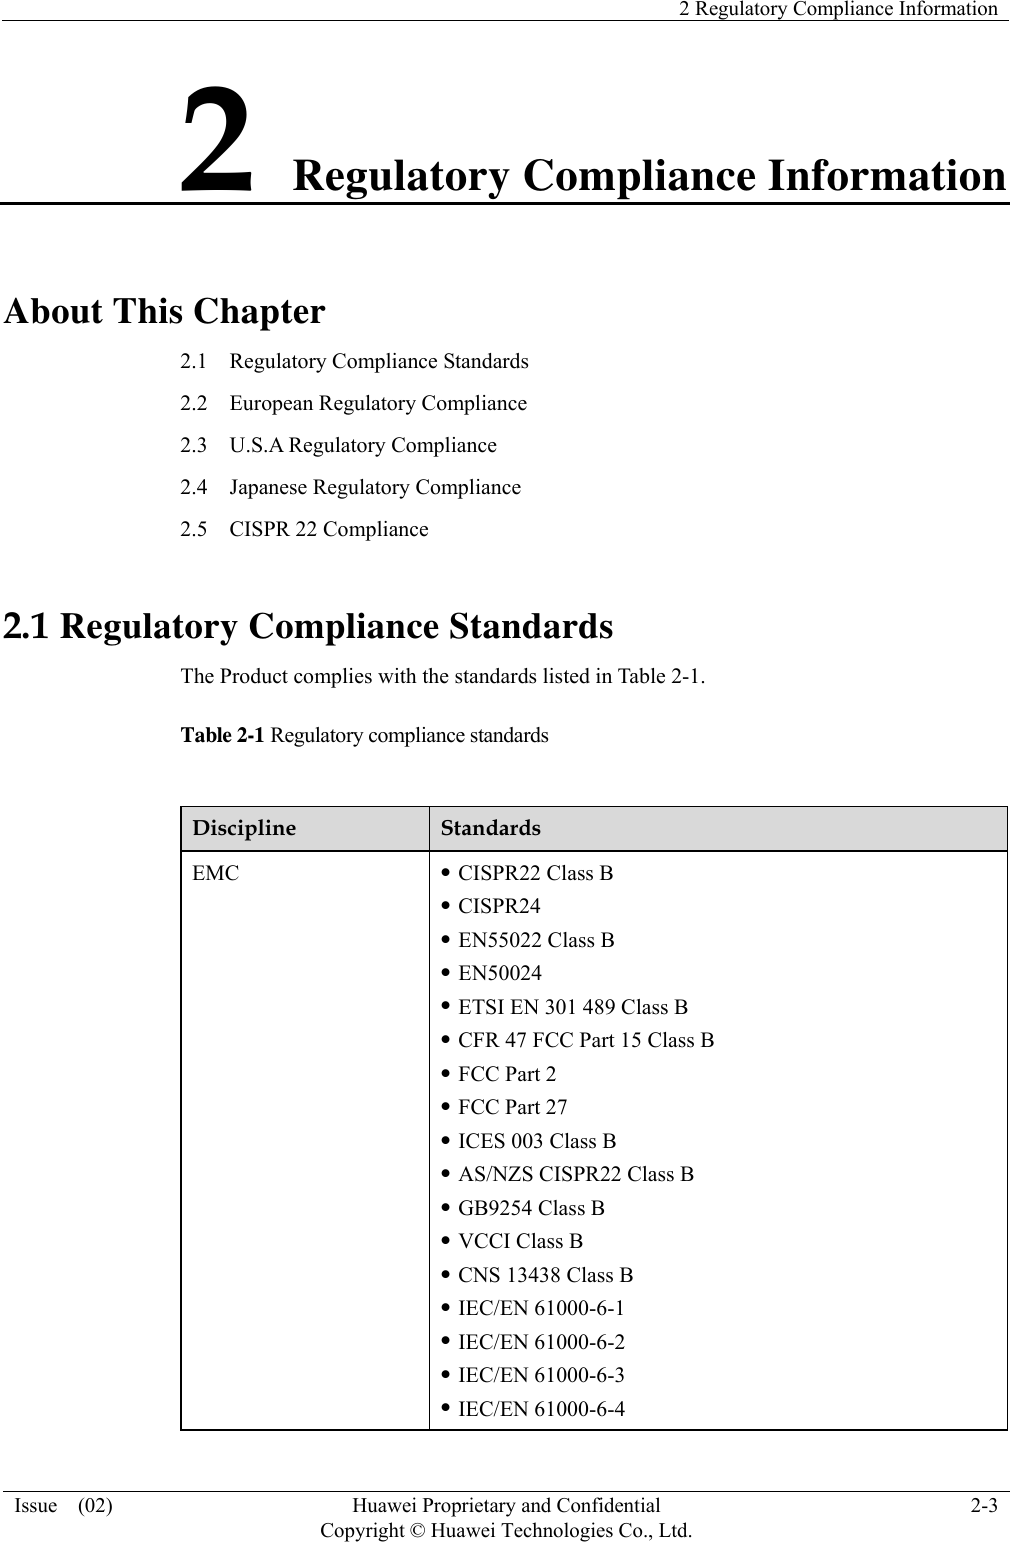    2 Regulatory Compliance Information Issue  (02)  Huawei Proprietary and Confidential     Copyright © Huawei Technologies Co., Ltd.2-3 2 Regulatory Compliance Information About This Chapter 2.1    Regulatory Compliance Standards 2.2  European Regulatory Compliance 2.3  U.S.A Regulatory Compliance 2.4  Japanese Regulatory Compliance 2.5    CISPR 22 Compliance 2.1 Regulatory Compliance Standards The Product complies with the standards listed in Table 2-1. Table 2-1 Regulatory compliance standards  Discipline  Standards EMC  z CISPR22 Class B z CISPR24 z EN55022 Class B z EN50024 z ETSI EN 301 489 Class B z CFR 47 FCC Part 15 Class B z FCC Part 2 z FCC Part 27 z ICES 003 Class B z AS/NZS CISPR22 Class B z GB9254 Class B z VCCI Class B z CNS 13438 Class B z IEC/EN 61000-6-1 z IEC/EN 61000-6-2 z IEC/EN 61000-6-3 z IEC/EN 61000-6-4 